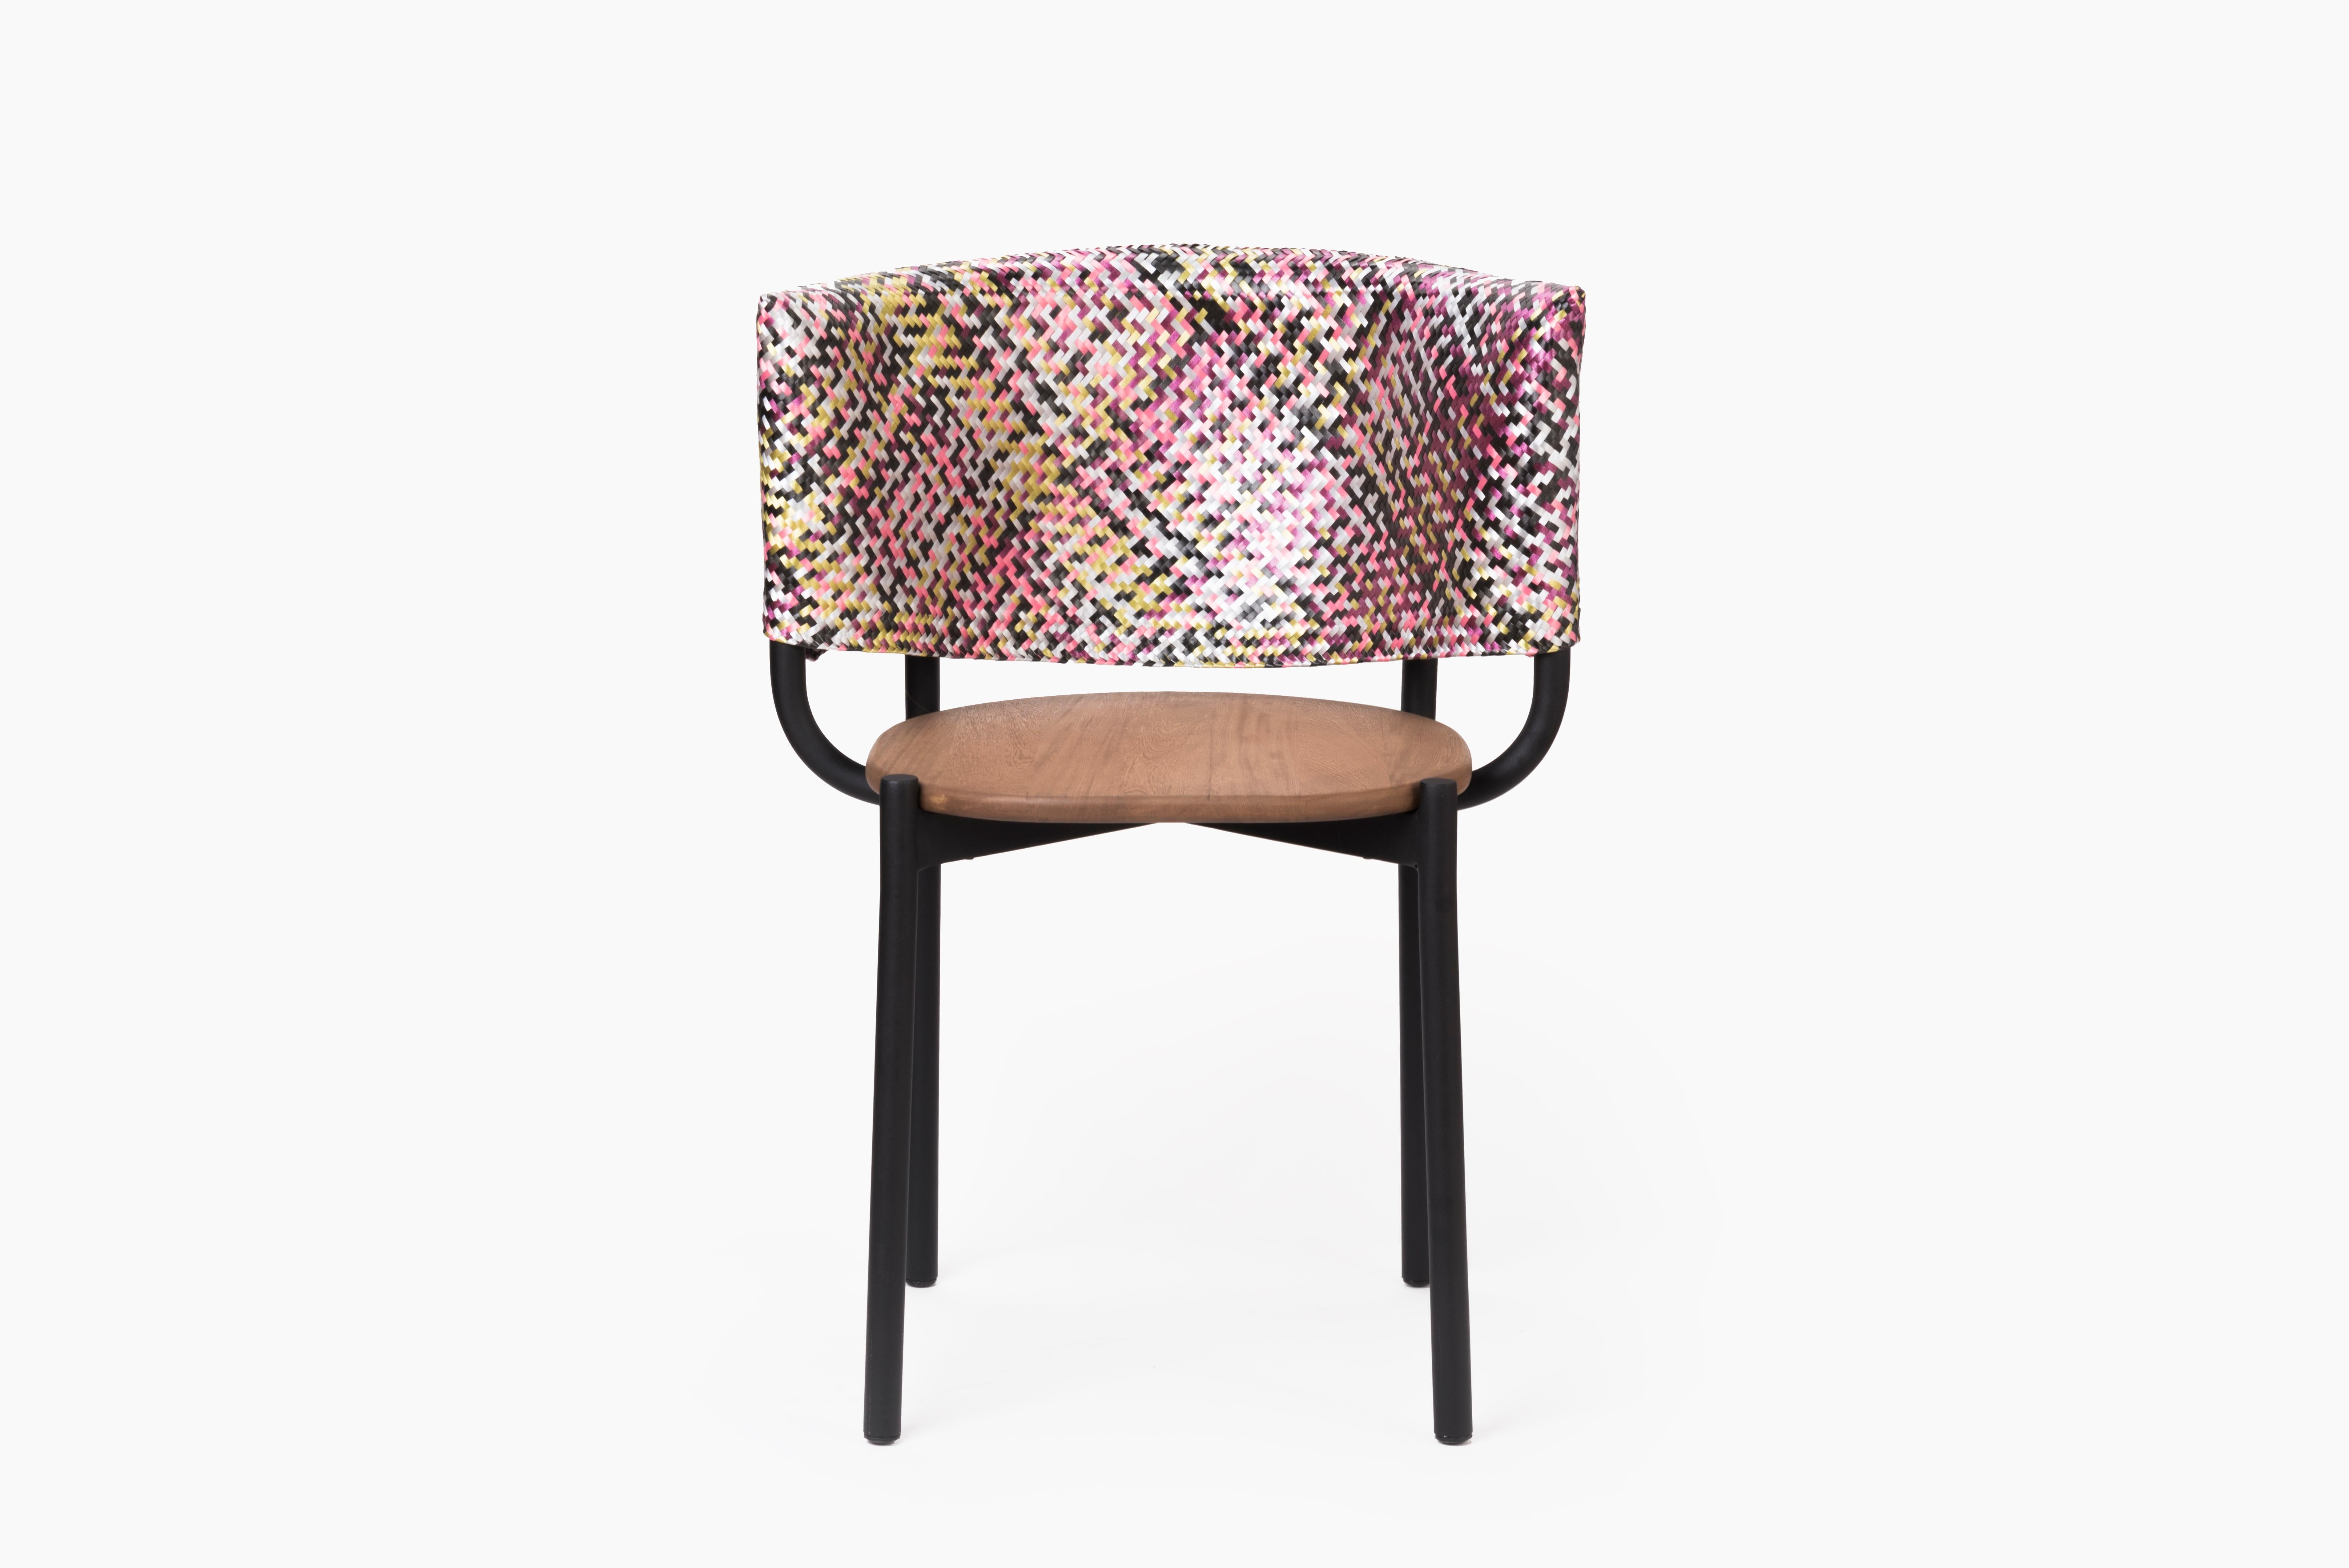 “La Bonita” terrace and outdoor chair, inspired by the ability with which basket weaving communities randomly combine colors, giving infinite possibilities of combinations. Its aluminum structure provides the ideal lightness for your comfort in